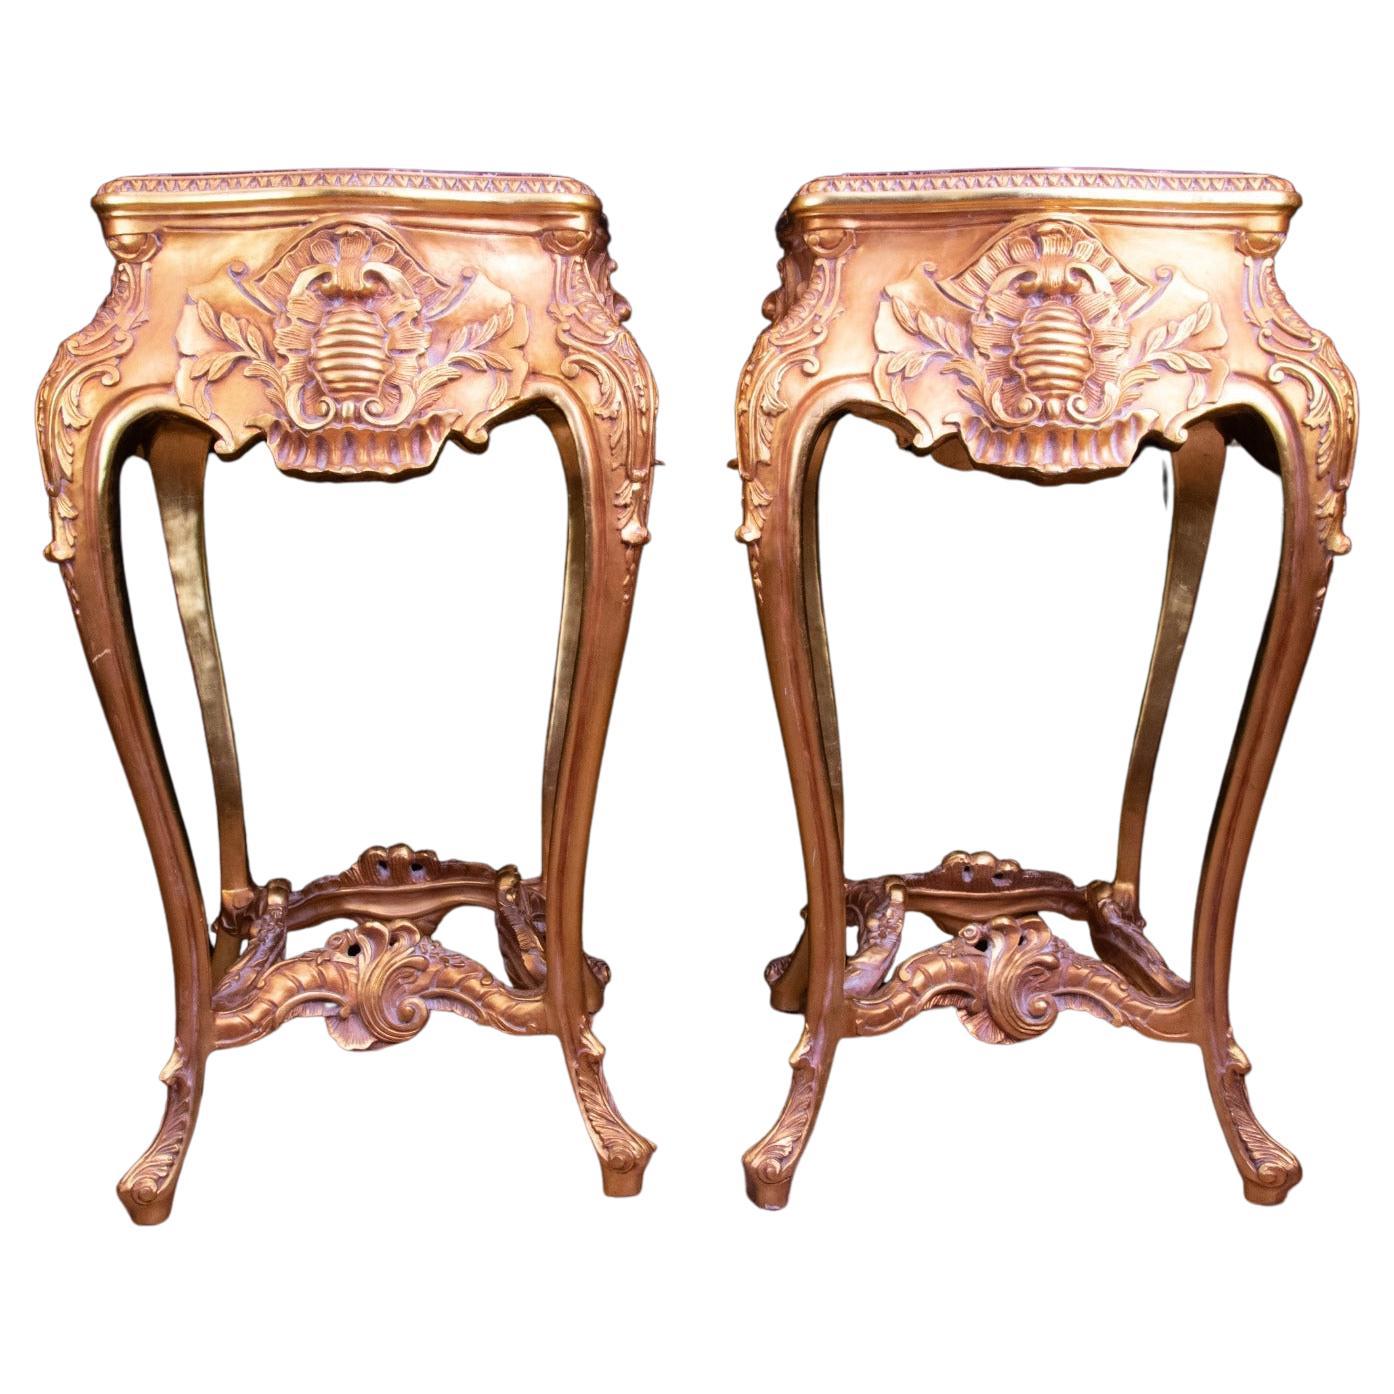 Pair of Italian Rococo Tables - Gilt Pedestal Stand For Sale